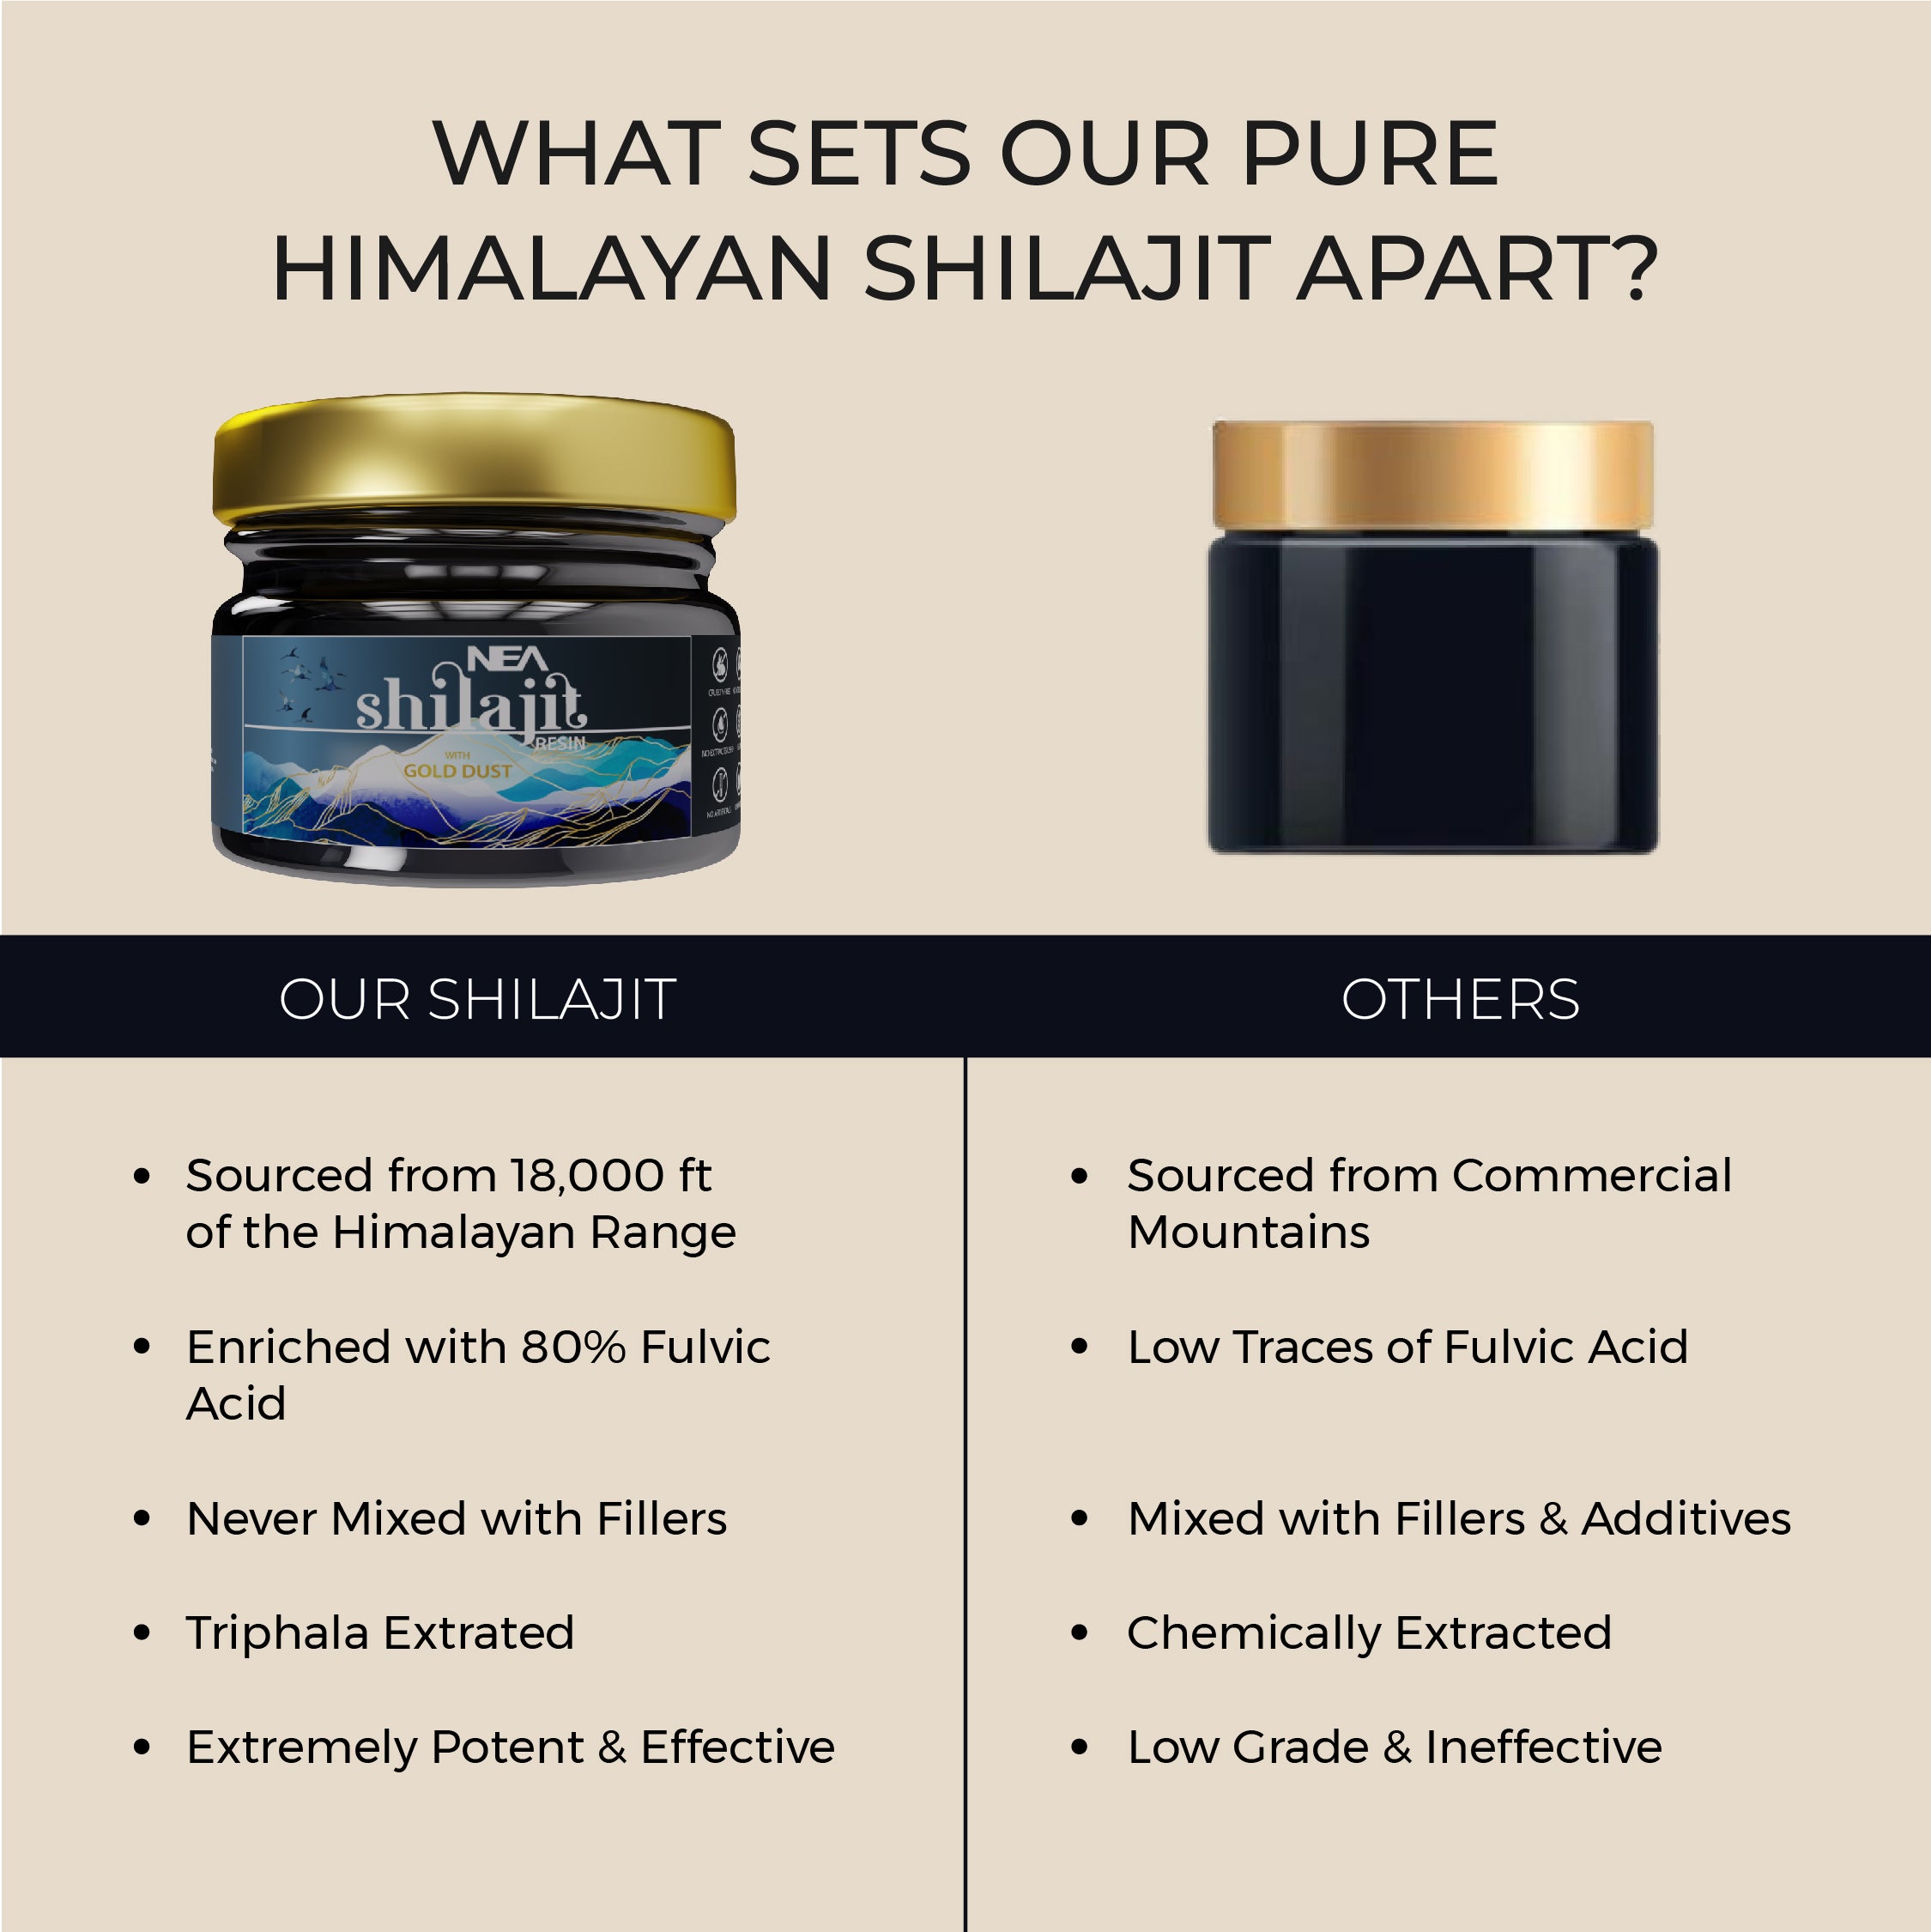 NEA Shilajit with Gold Dust For Strength, Stamina, Muscle Growth (15 gm) with 80% Fulvic